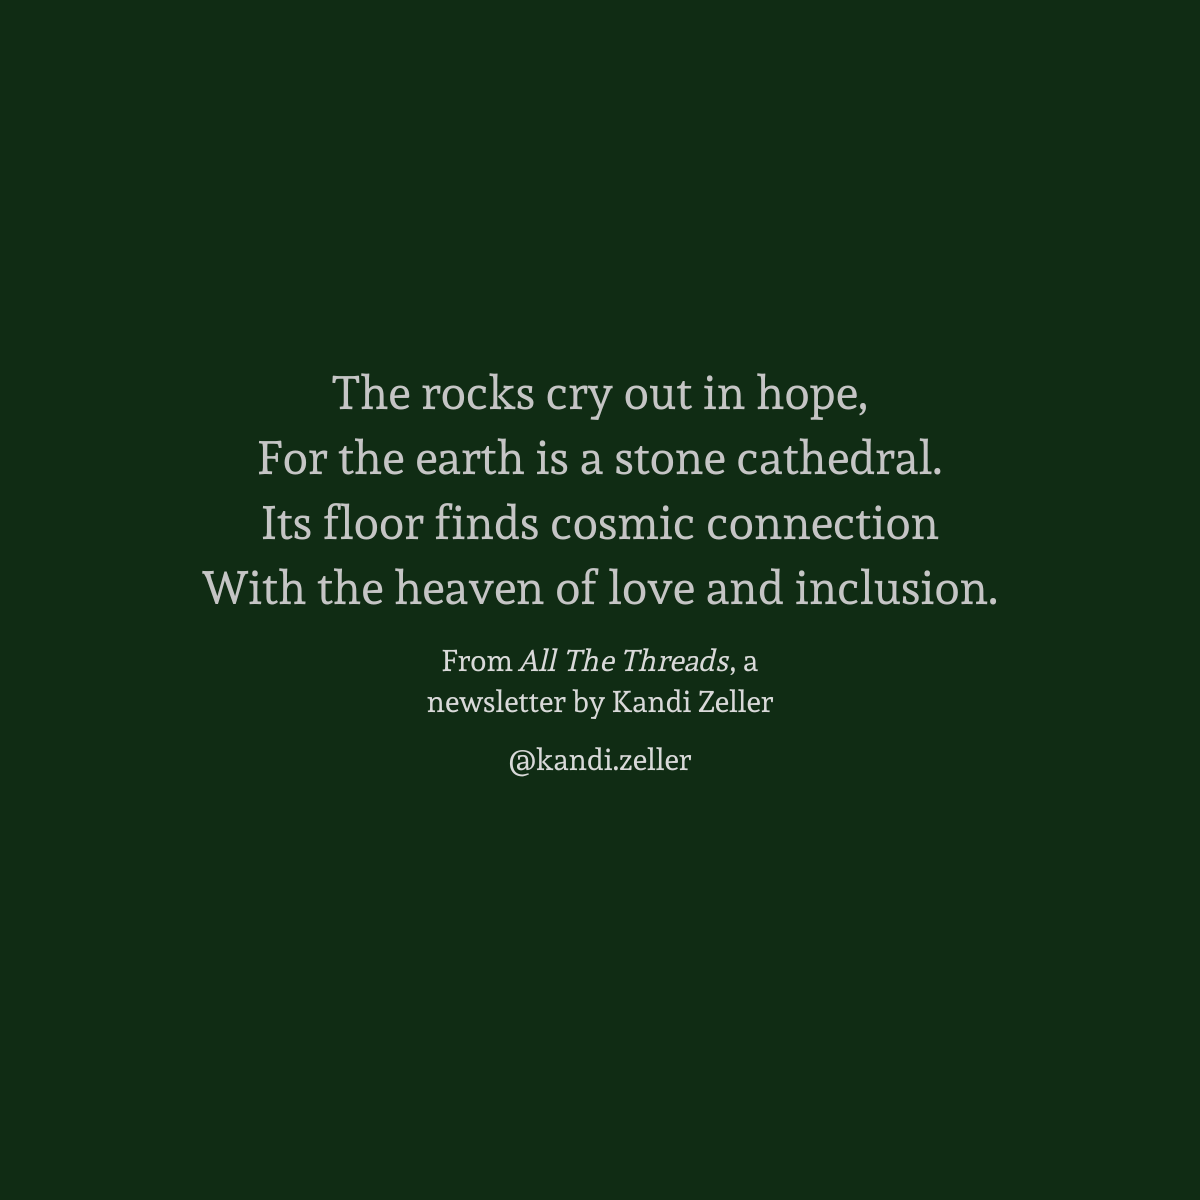 A dark green background with white lettering that reads, “The rocks cry out in hope, / For the earth is a stone cathedral. / Its floor finds cosmic connection / With the heaven of love and inclusion. / From All The Threads, a newsletter by Kandi Zeller, @Kandi.Zeller”